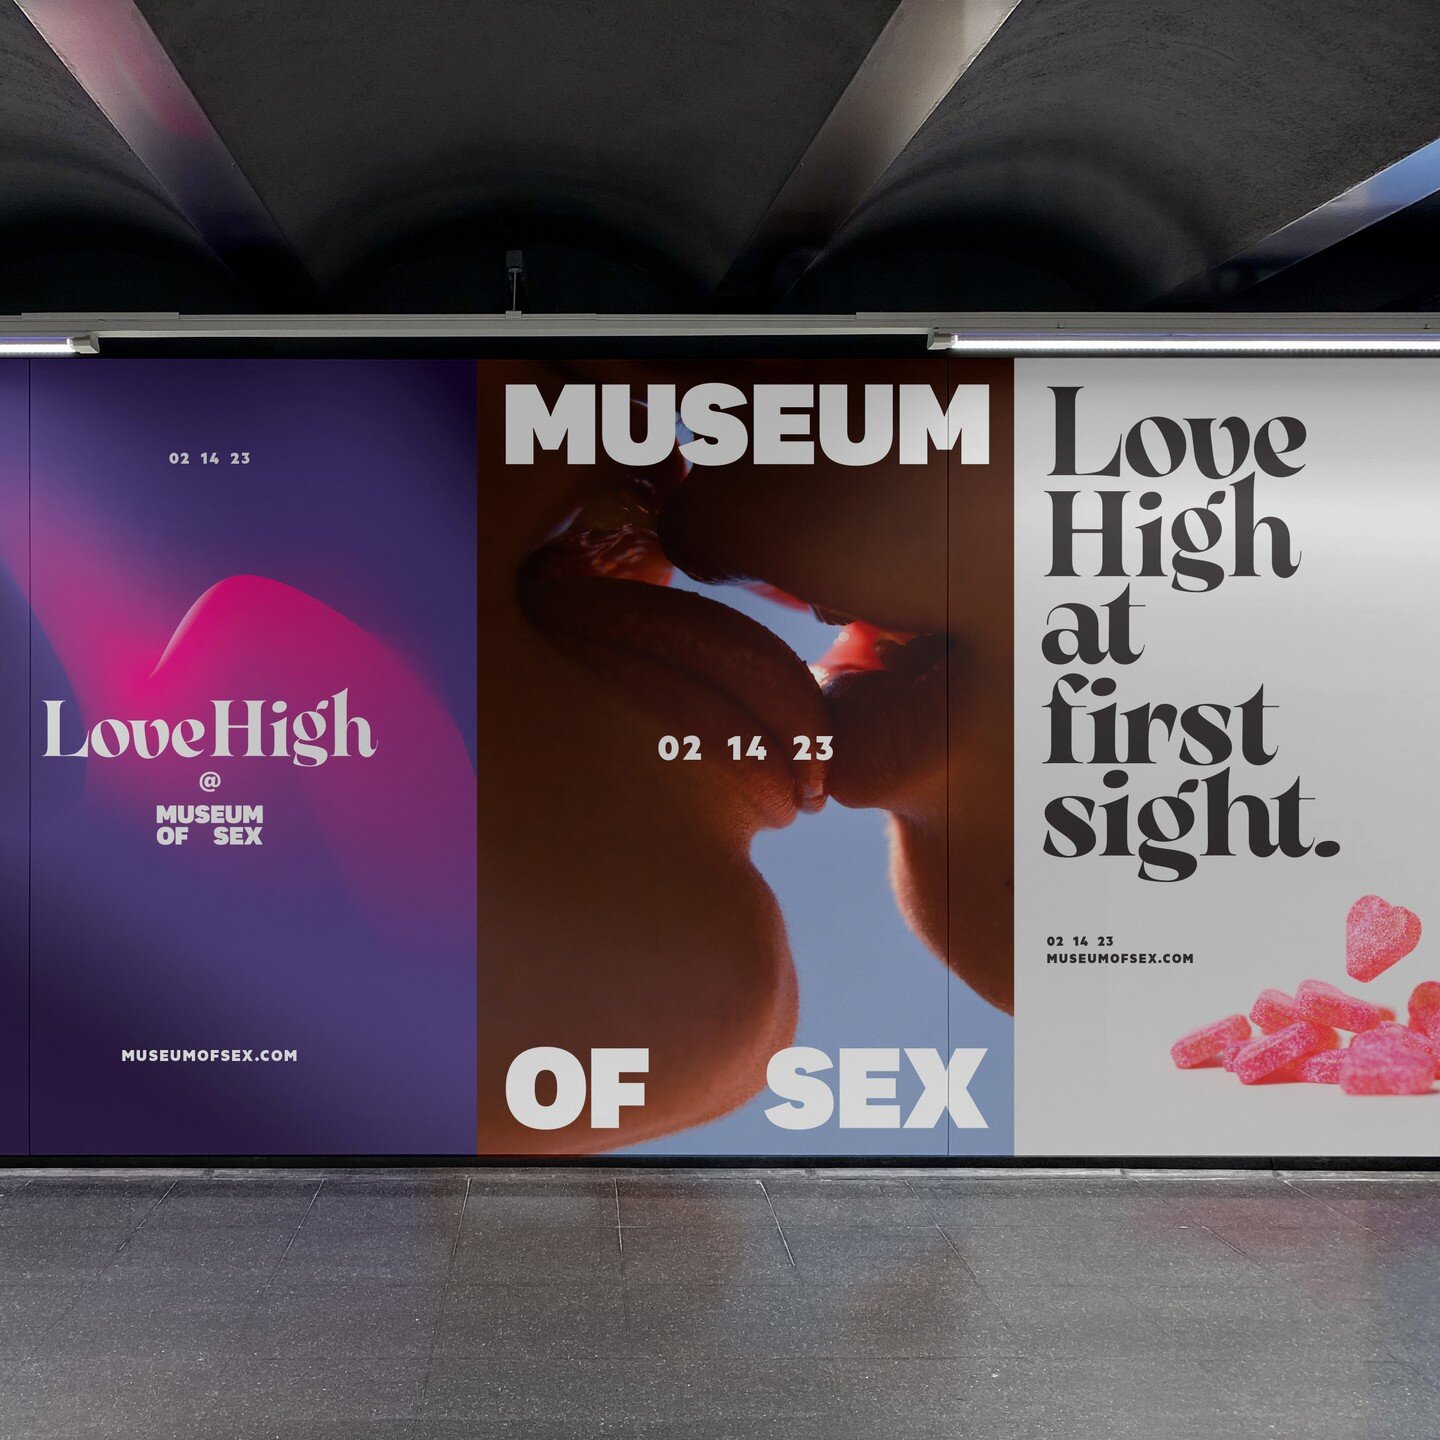 Roses are red, violets are blue, sex gummies are sweet and perfect for two. Creative for LoveHigh Hemp THC edibles for @MuseumofSex in NYC.

#lovehigh #museumofsex #branding #brandpackaging #logo #logodesign #cannabis #nyc #valentines2023 #museum #ha